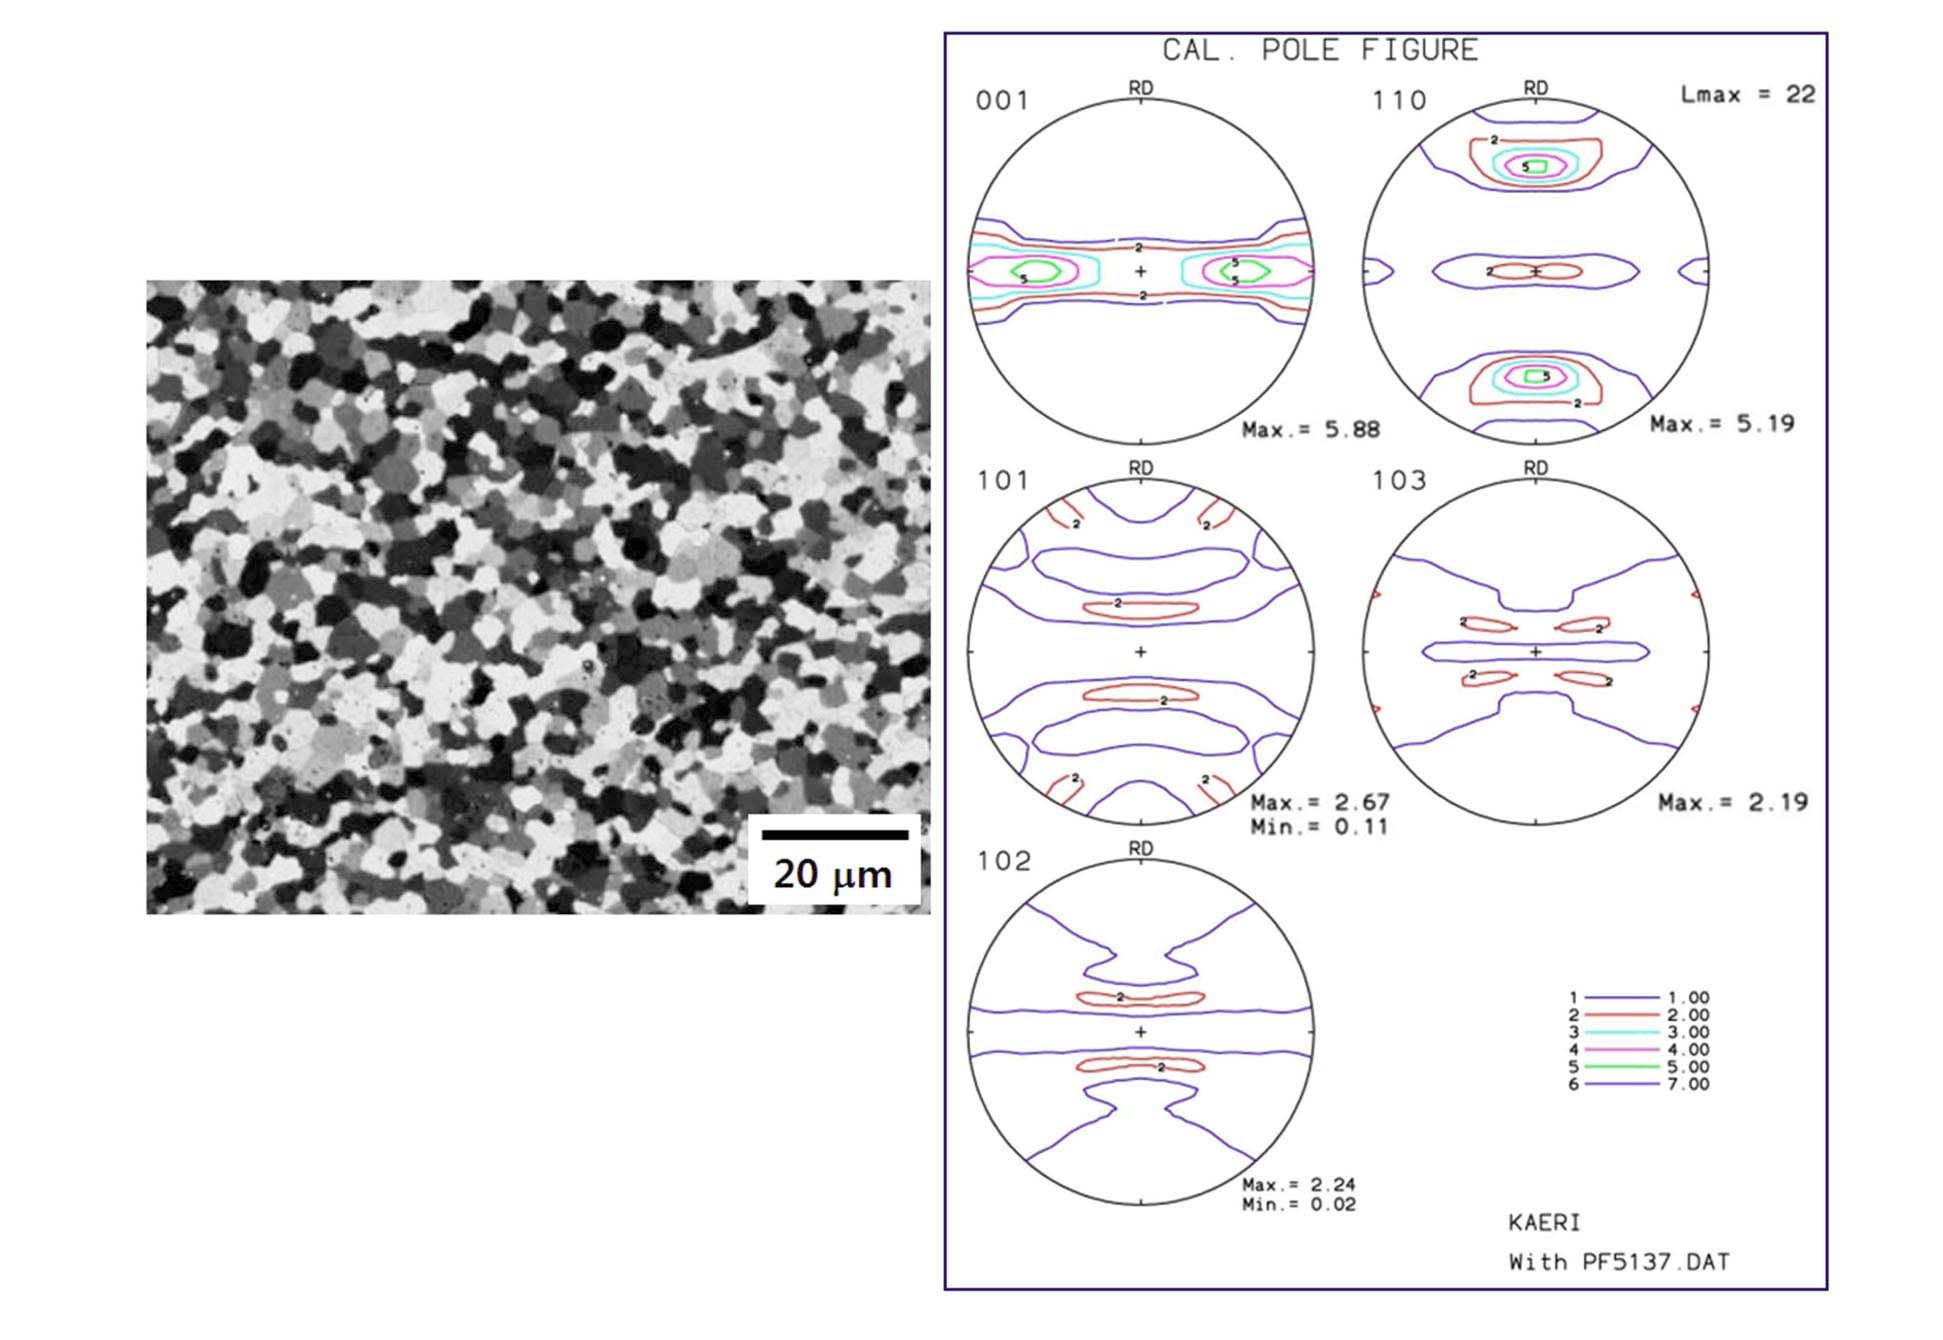 Optical Micrograph and Pole Figure Analysis Results of T-1 Alloy